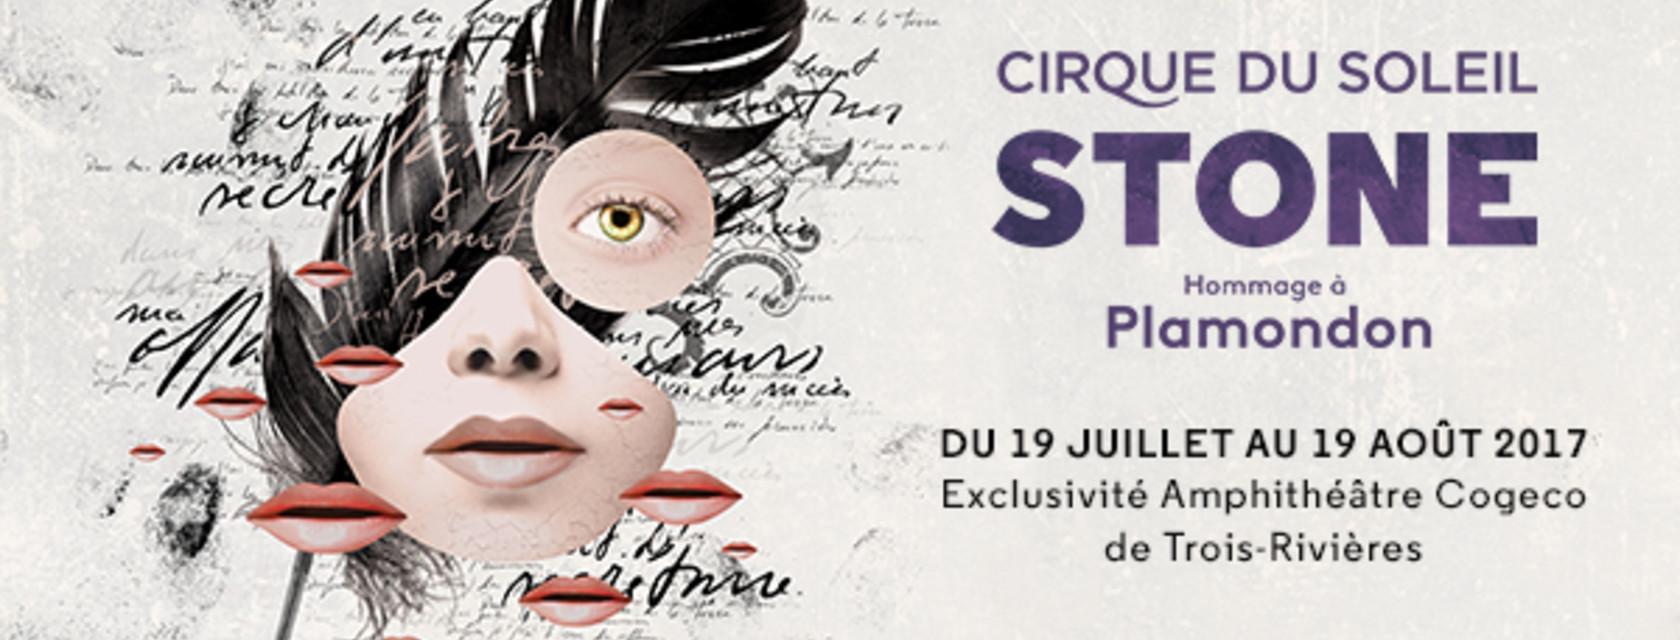 STONE: THIRD SHOW OF THE TRIBUTE SERIES, IMAGINED BY THE  CIRQUE DU SOLEIL